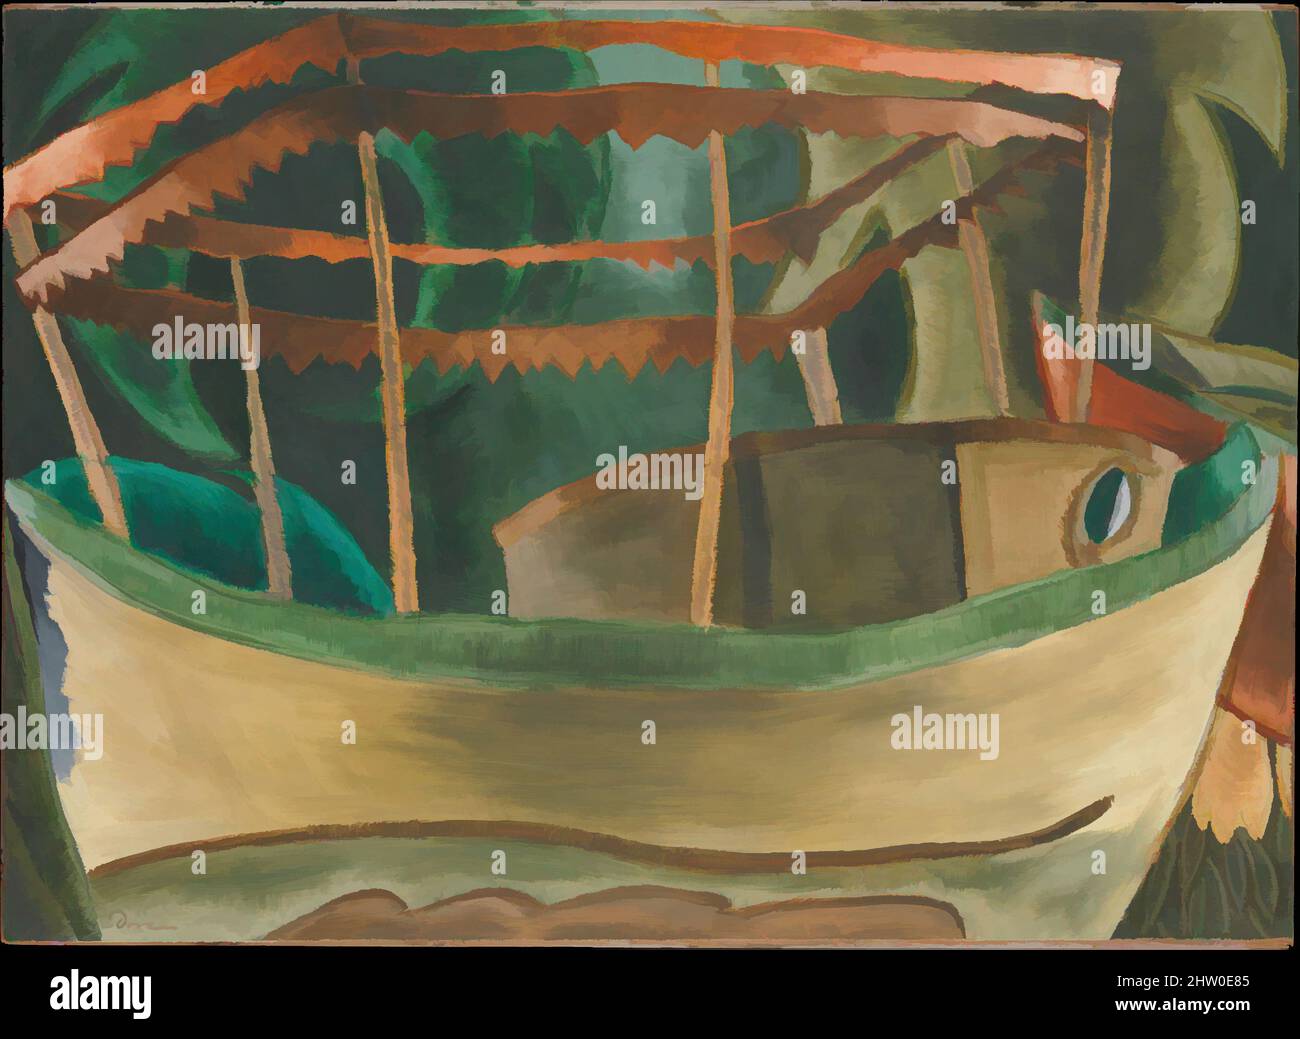 Art inspired by Fishboat, 1930, Oil on paperboard nailed to wood strainer, 24 1/4 × 33 1/4 in. (61.6 × 84.5 cm), Paintings, Arthur Dove (American, Canandaigua, New York 1880–1946 Huntington, New York), Dove spent much of his artistic career either living on a boat (in warm weather) or, Classic works modernized by Artotop with a splash of modernity. Shapes, color and value, eye-catching visual impact on art. Emotions through freedom of artworks in a contemporary way. A timeless message pursuing a wildly creative new direction. Artists turning to the digital medium and creating the Artotop NFT Stock Photo